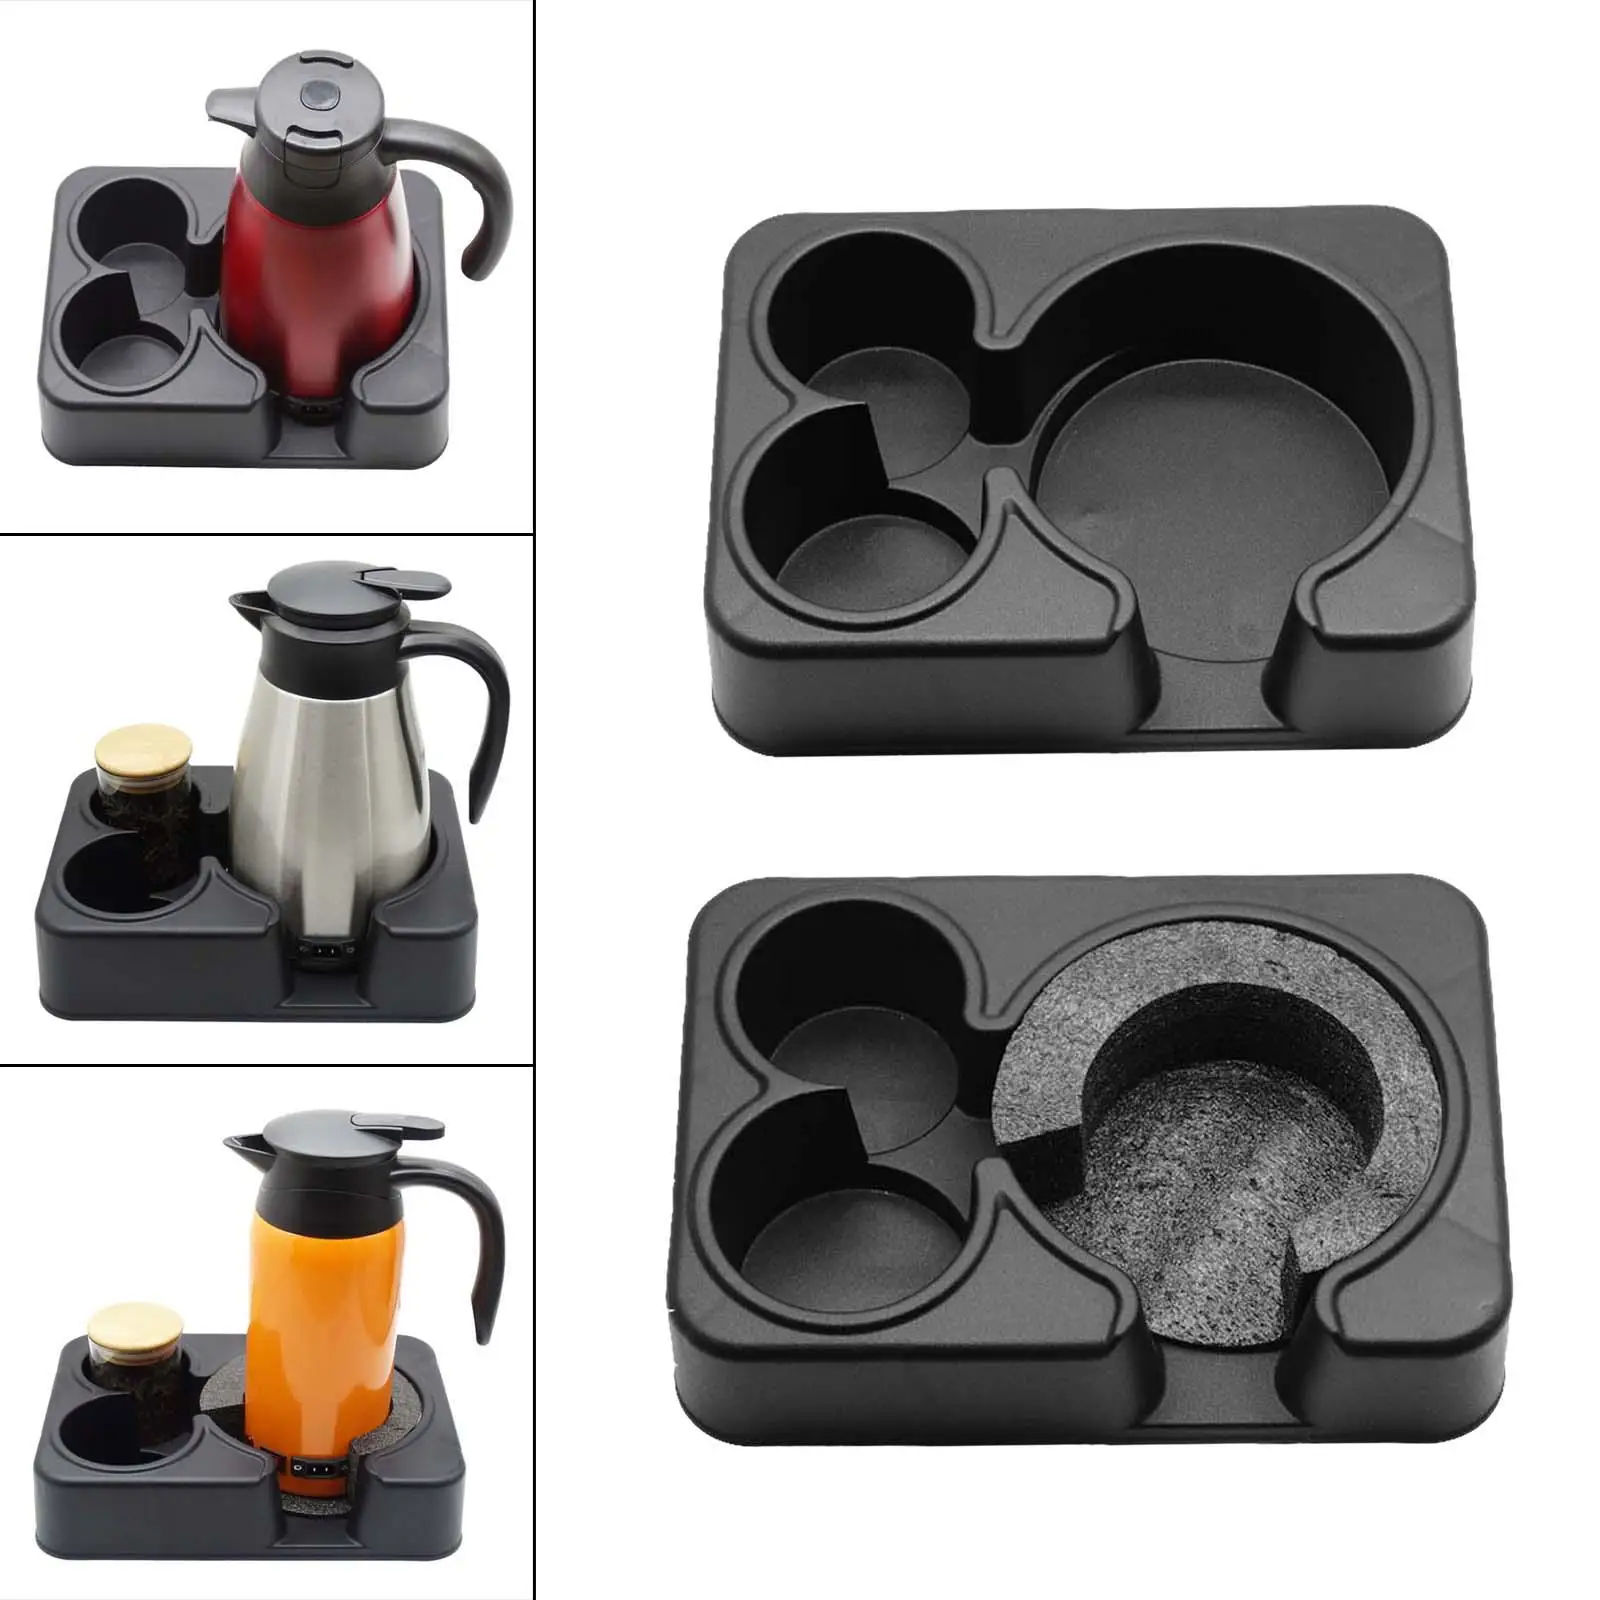 Water Cup Bracket, Bottle Stand Professional Accessories, Storage Practical Parts car pot Holder for Vehicle Auto SUV Car